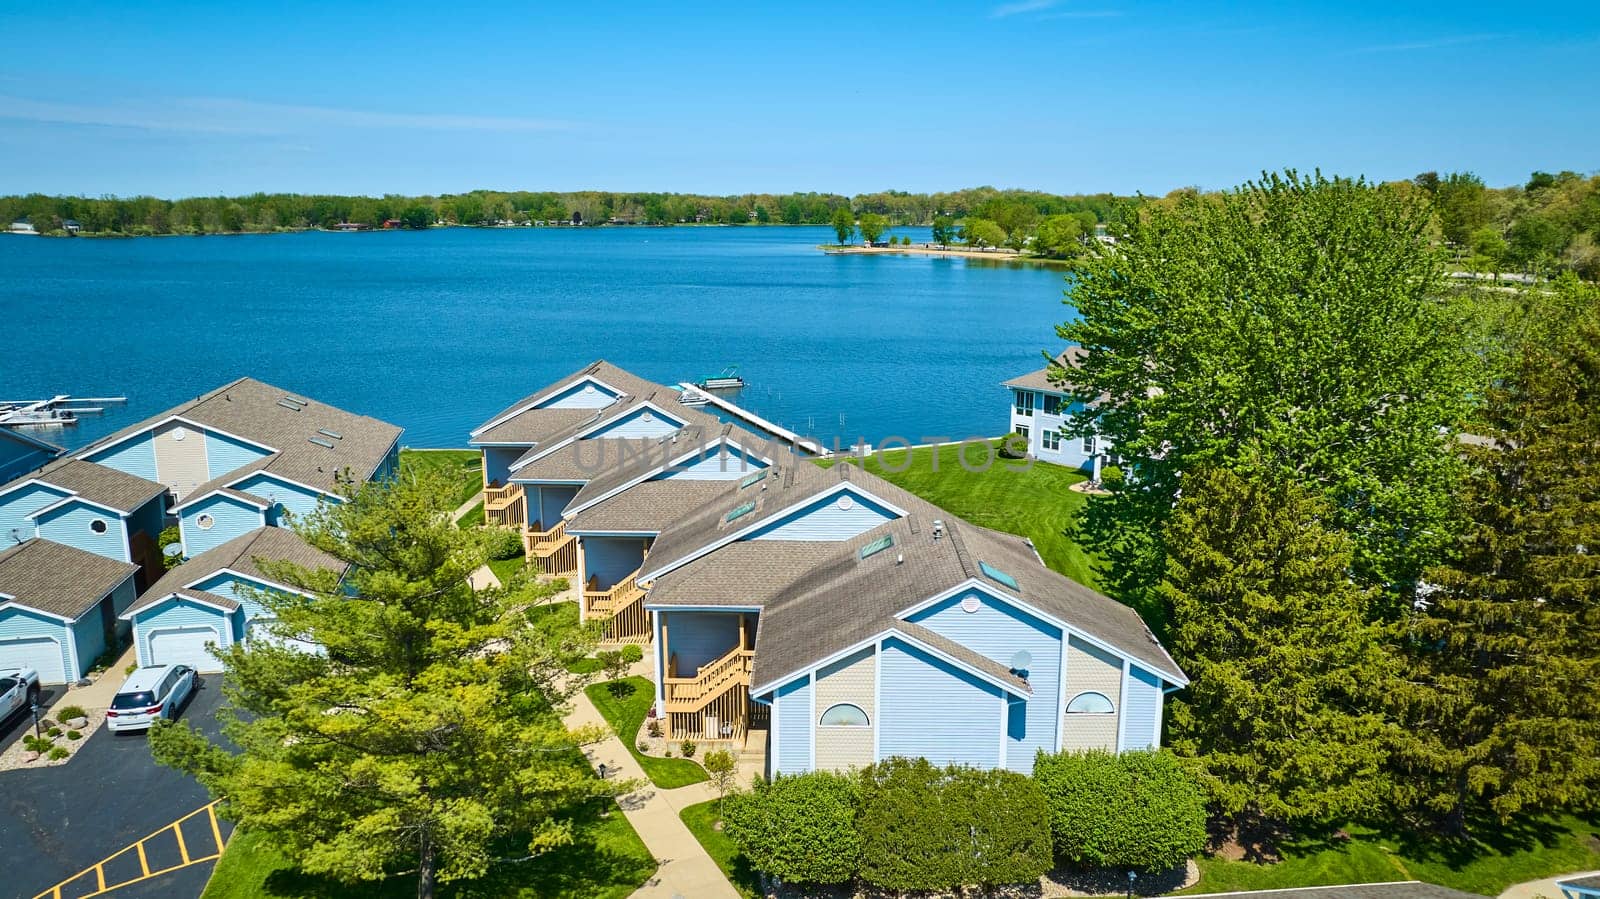 Aerial view of a peaceful lakeside community in Warsaw, Indiana, showcasing homes with private docks and vibrant greenery.